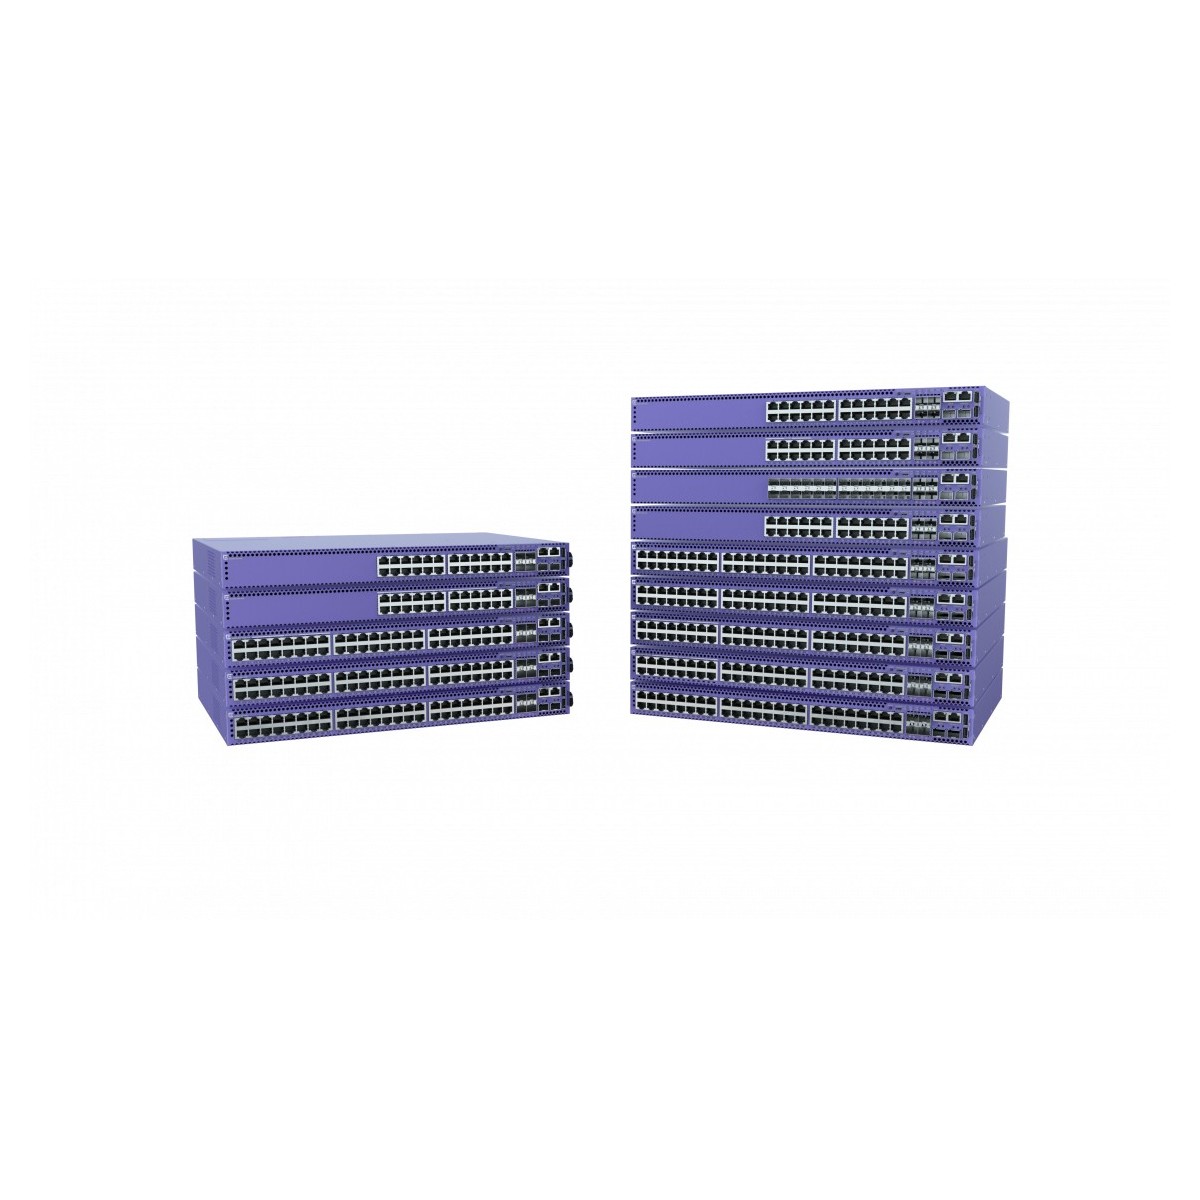 Extreme Networks ExtremeSwitching 5420F 24 FDX/HDX 2 4 10 - Switch - 1 Gbps